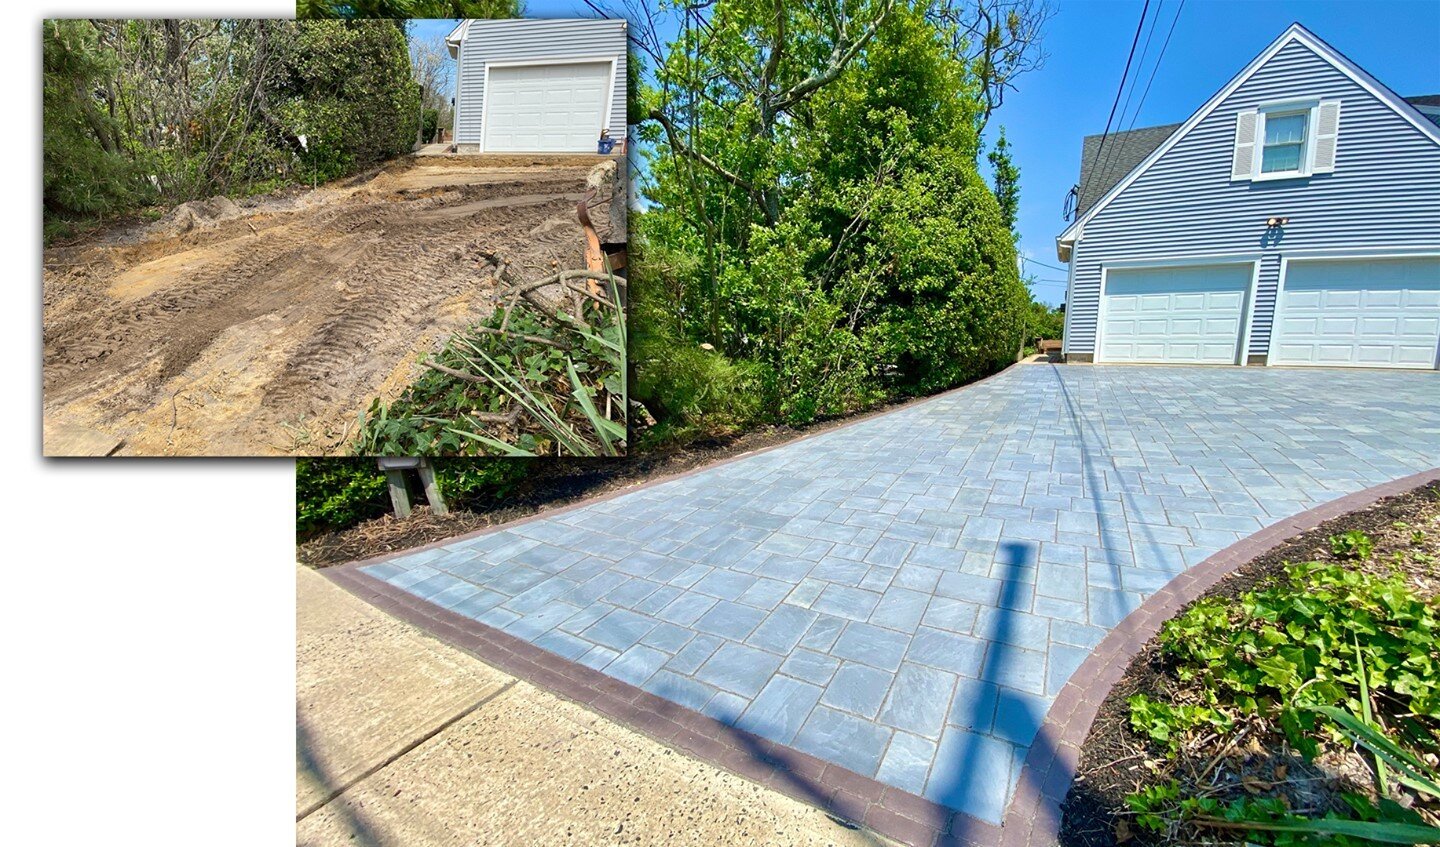 A beautifully laid hardscape at this Avon-By-The-Sea residence transforms this entrance to something distinguished but inviting. 

(732) 833-7702 |  www.Downtoearthlandscaping.com